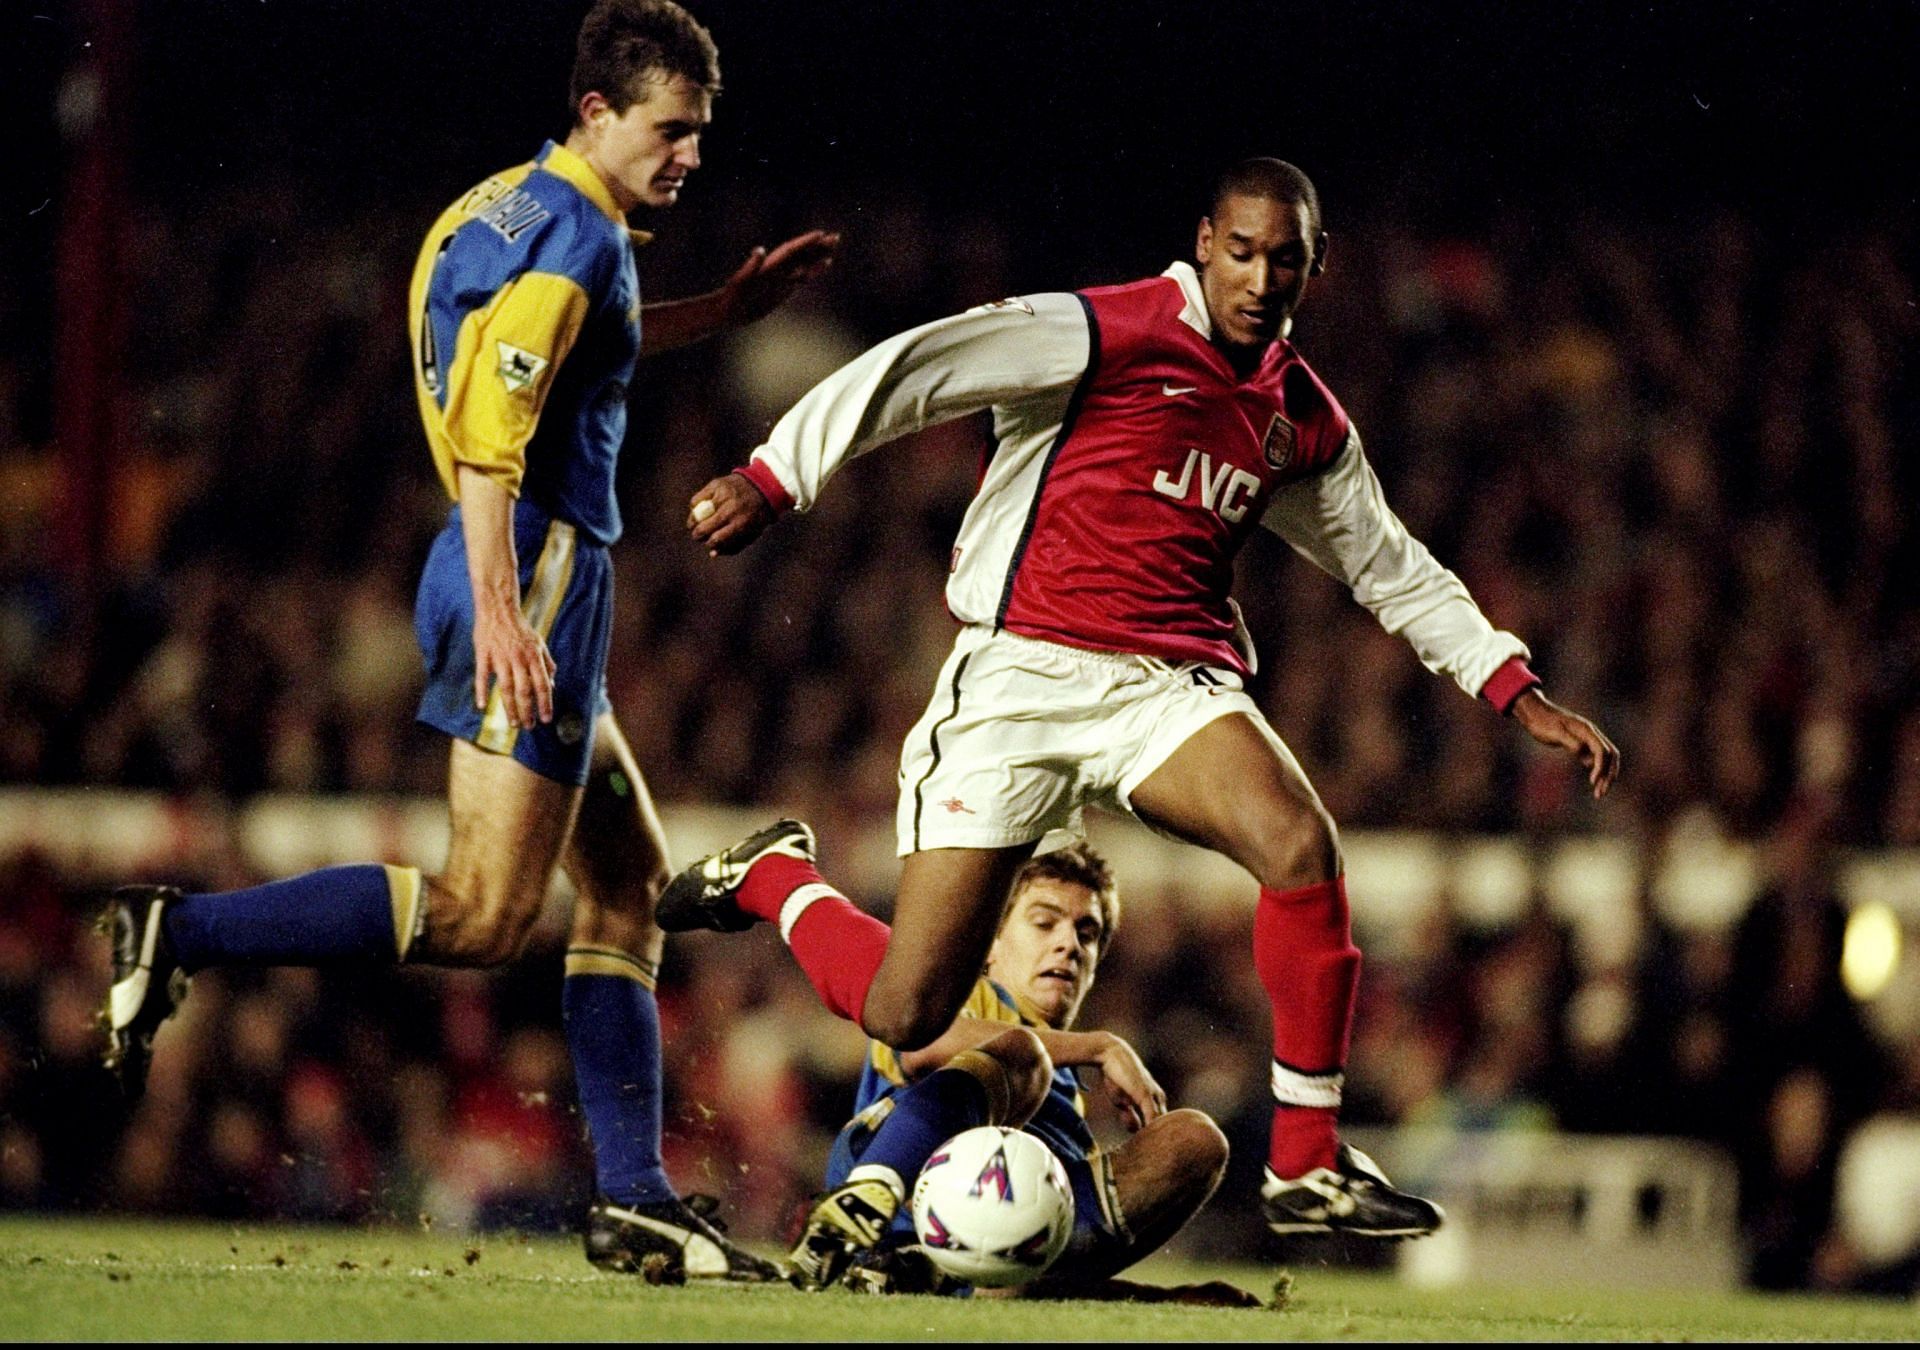 Nicolas Anelka was wrong in leaving the Gunners for Real Madrid